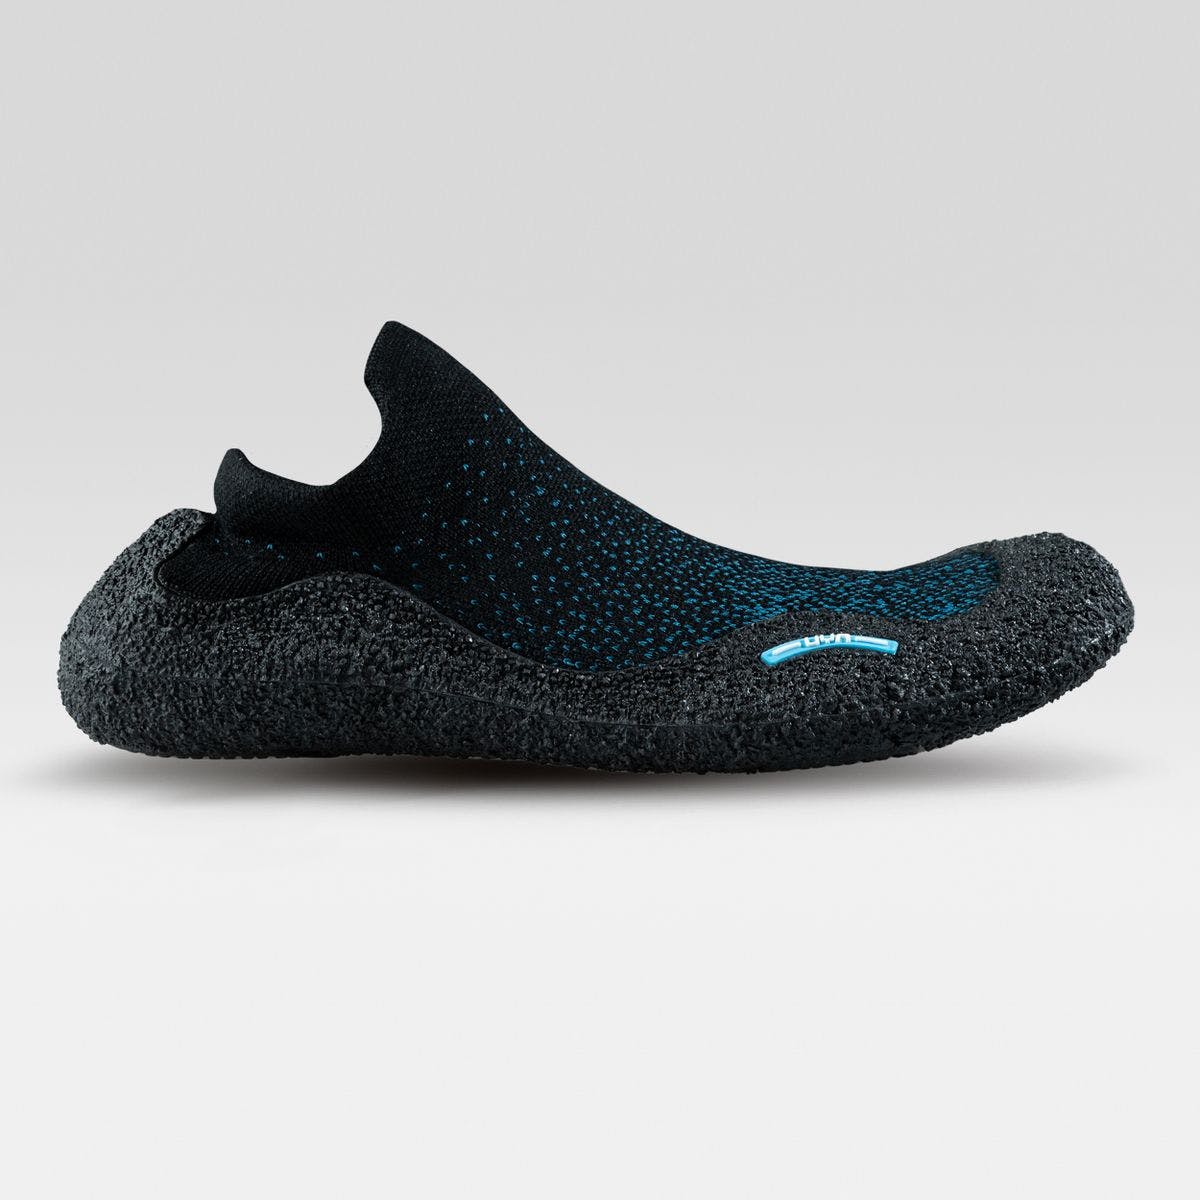 Chaussure-chaussette-uyn-shokie-black-turquoise